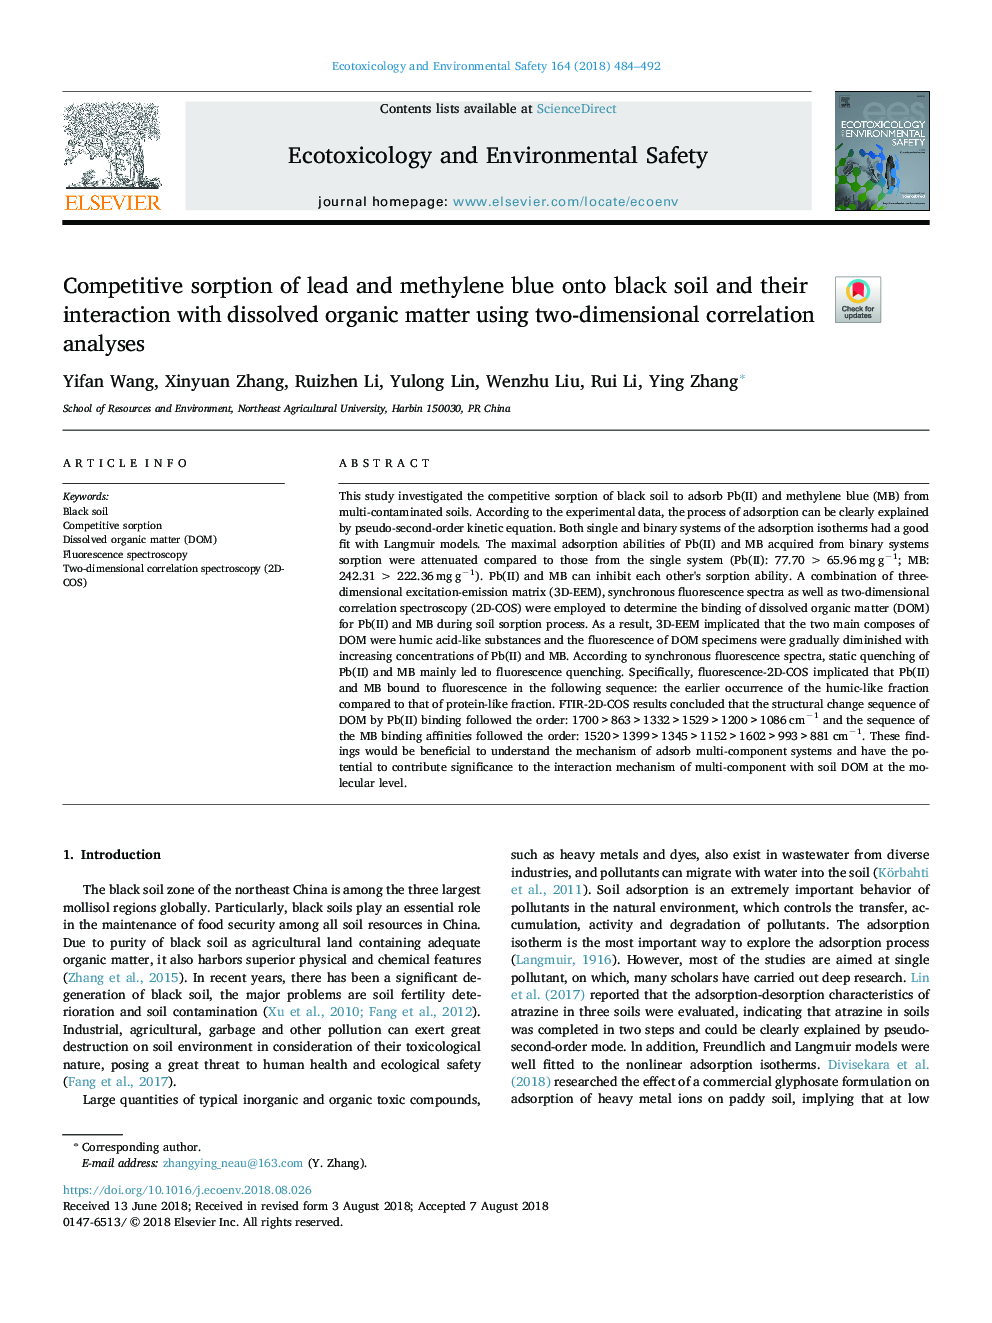 Competitive sorption of lead and methylene blue onto black soil and their interaction with dissolved organic matter using two-dimensional correlation analyses